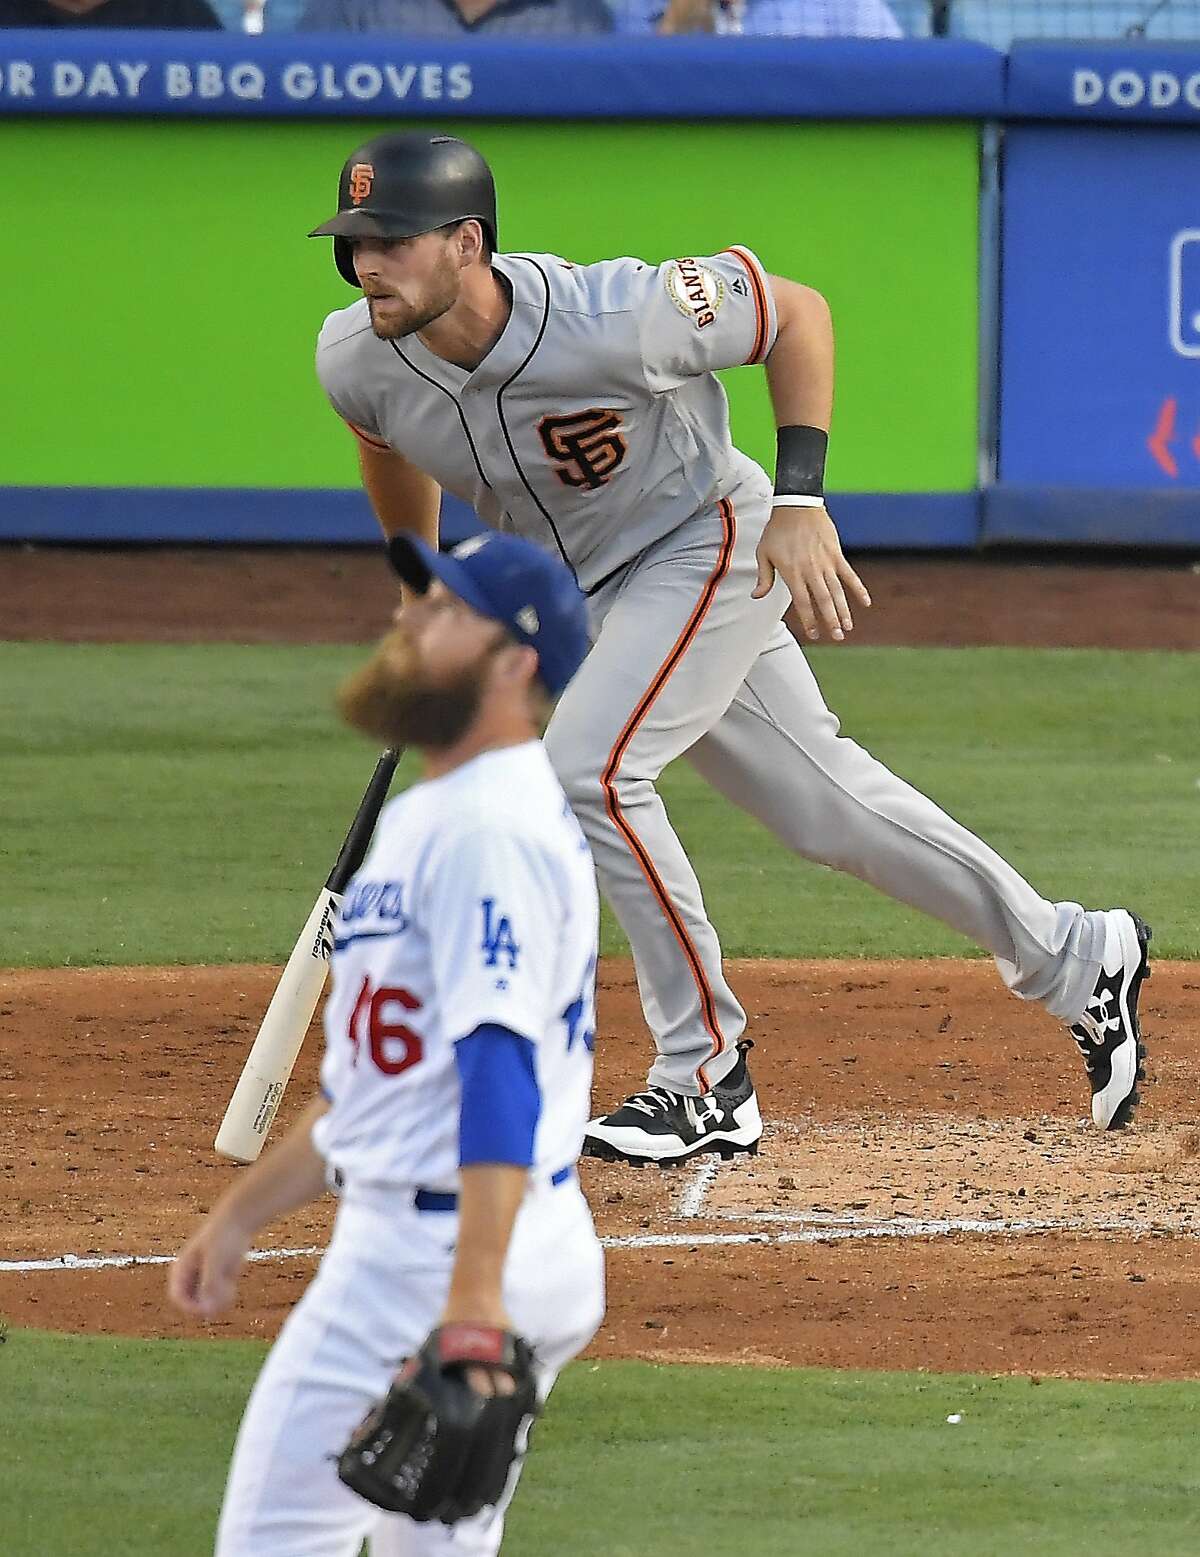 San Francisco Giants' Conor Gillaspie, top, runs the bases after hitting a solo home run as Los Angeles Dodgers relief pitcher Josh Fields watches during the eighth inning of a baseball game Sunday, July 30, 2017, in Los Angeles. (AP Photo/Mark J. Terrill)